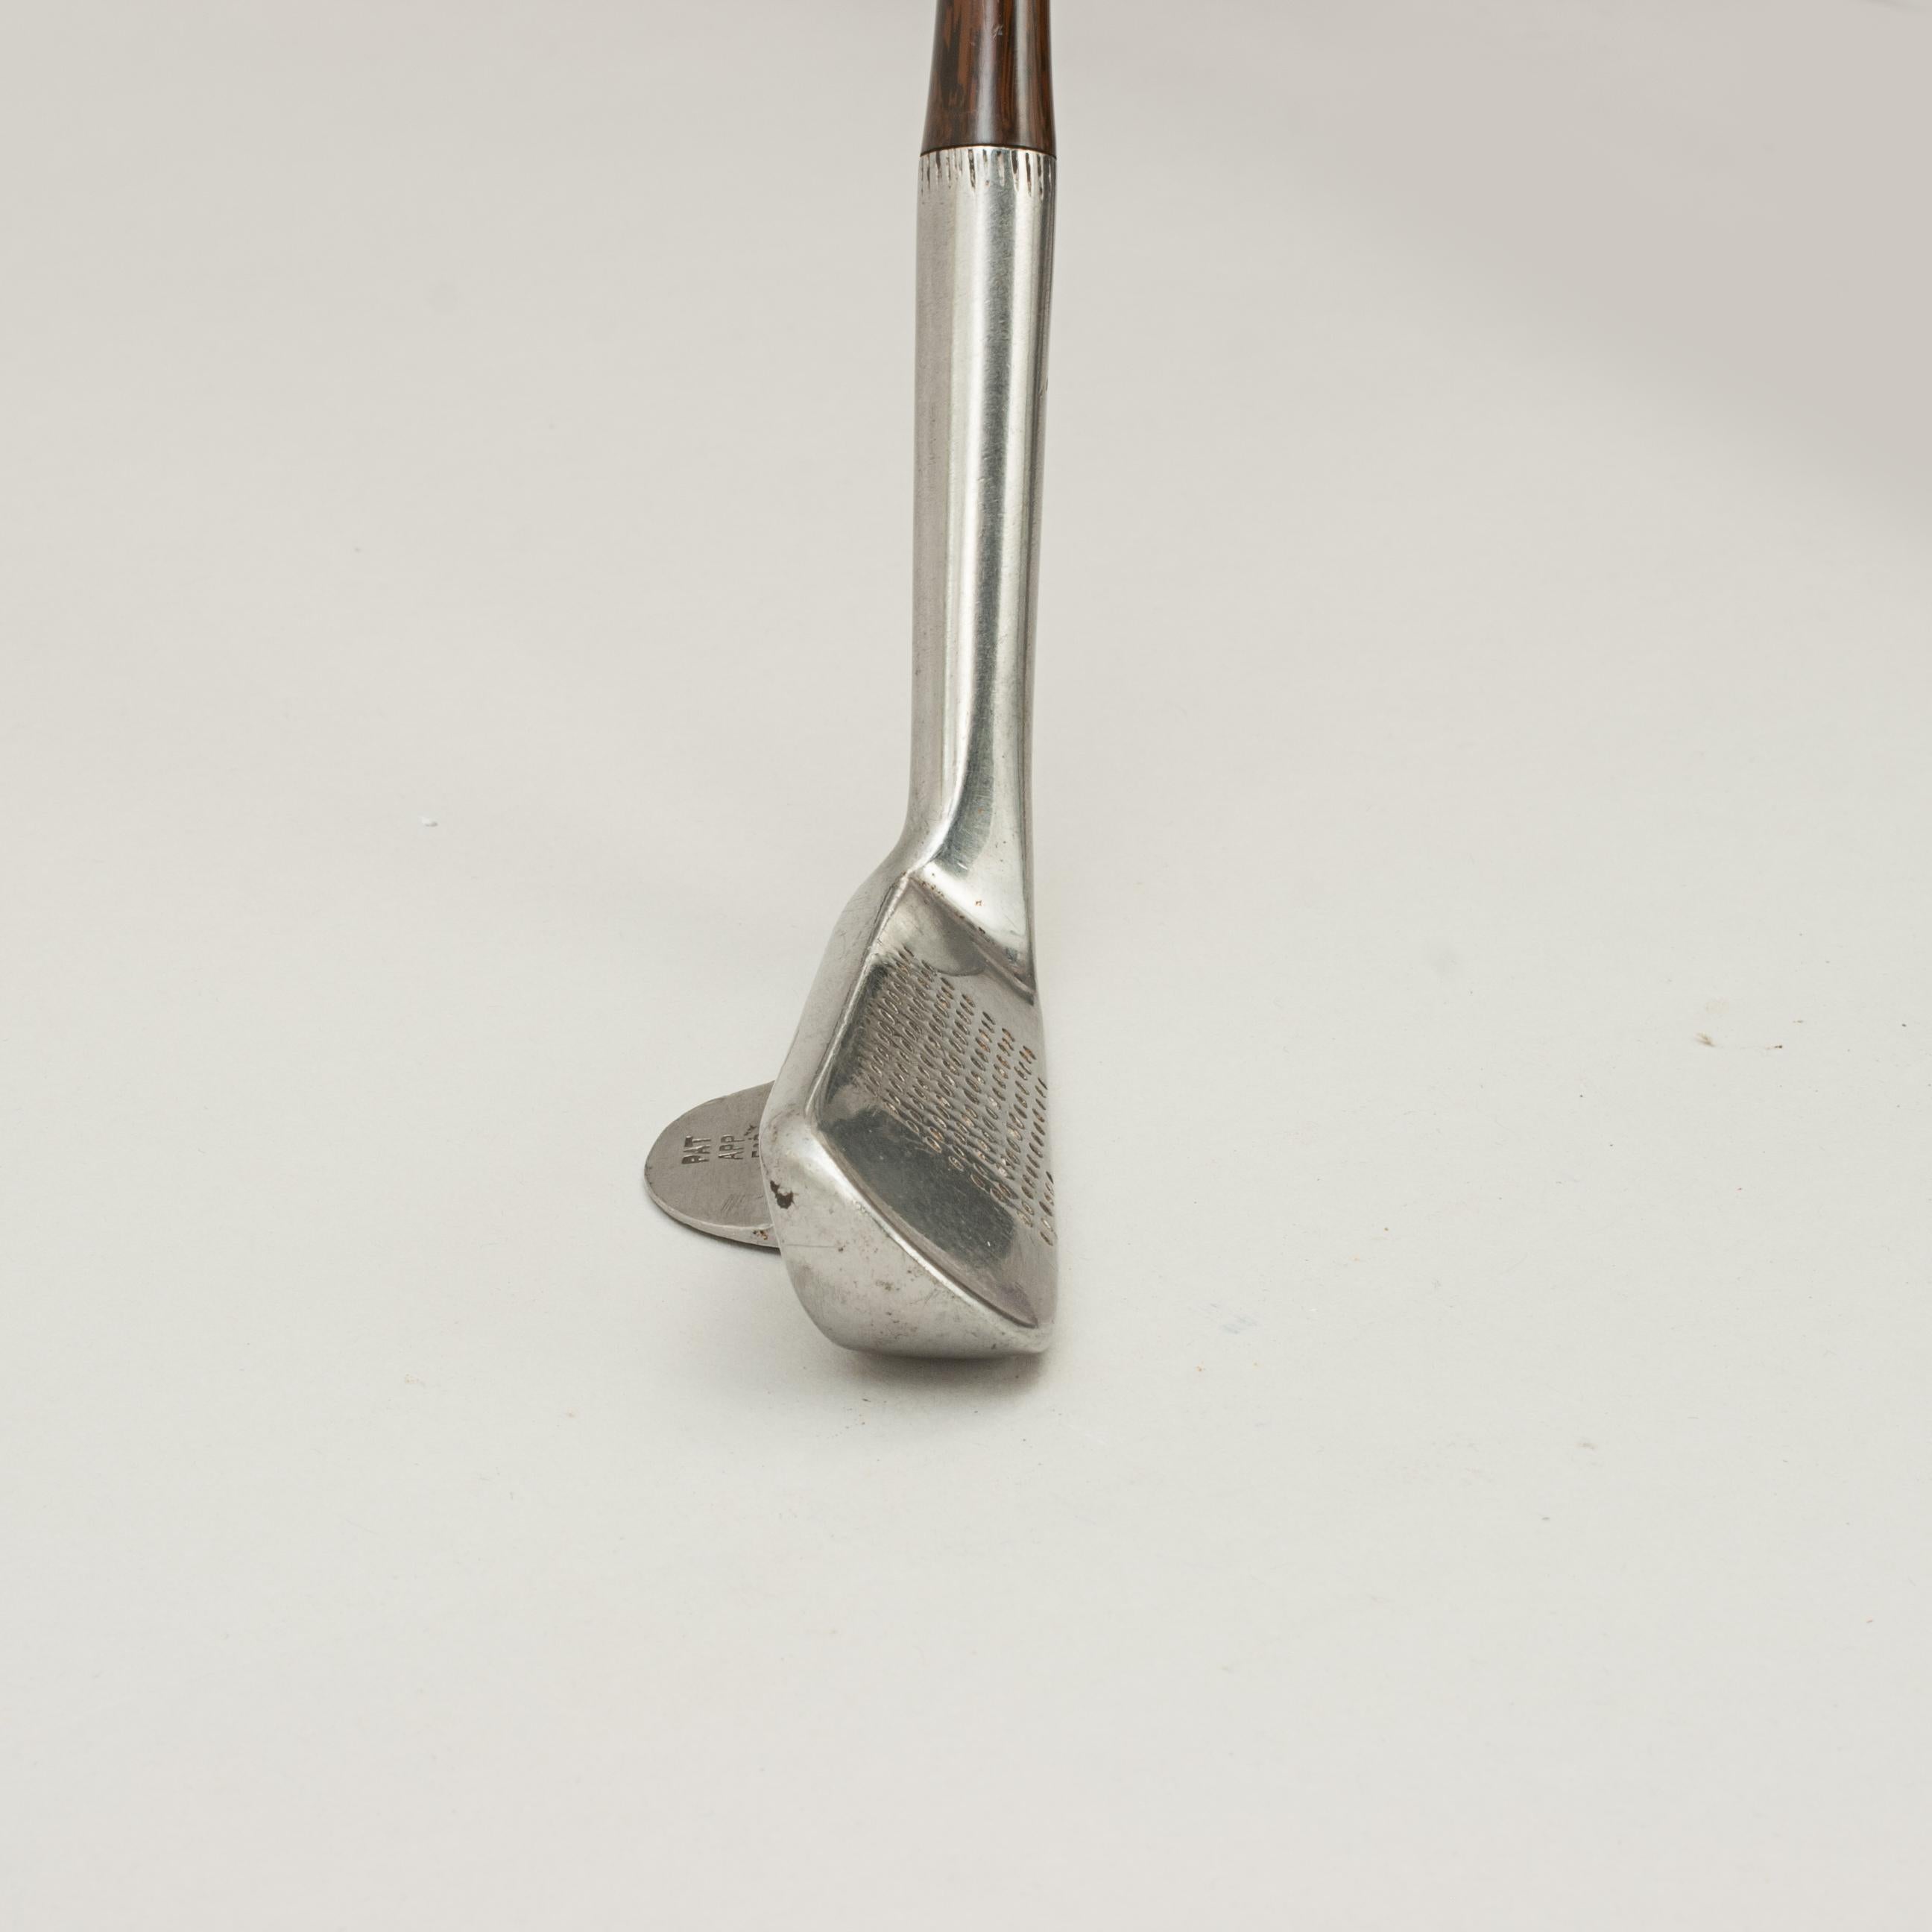 Lillywhite's 'Nonfooze' Steel Shafted Golf Club, Chipper 4